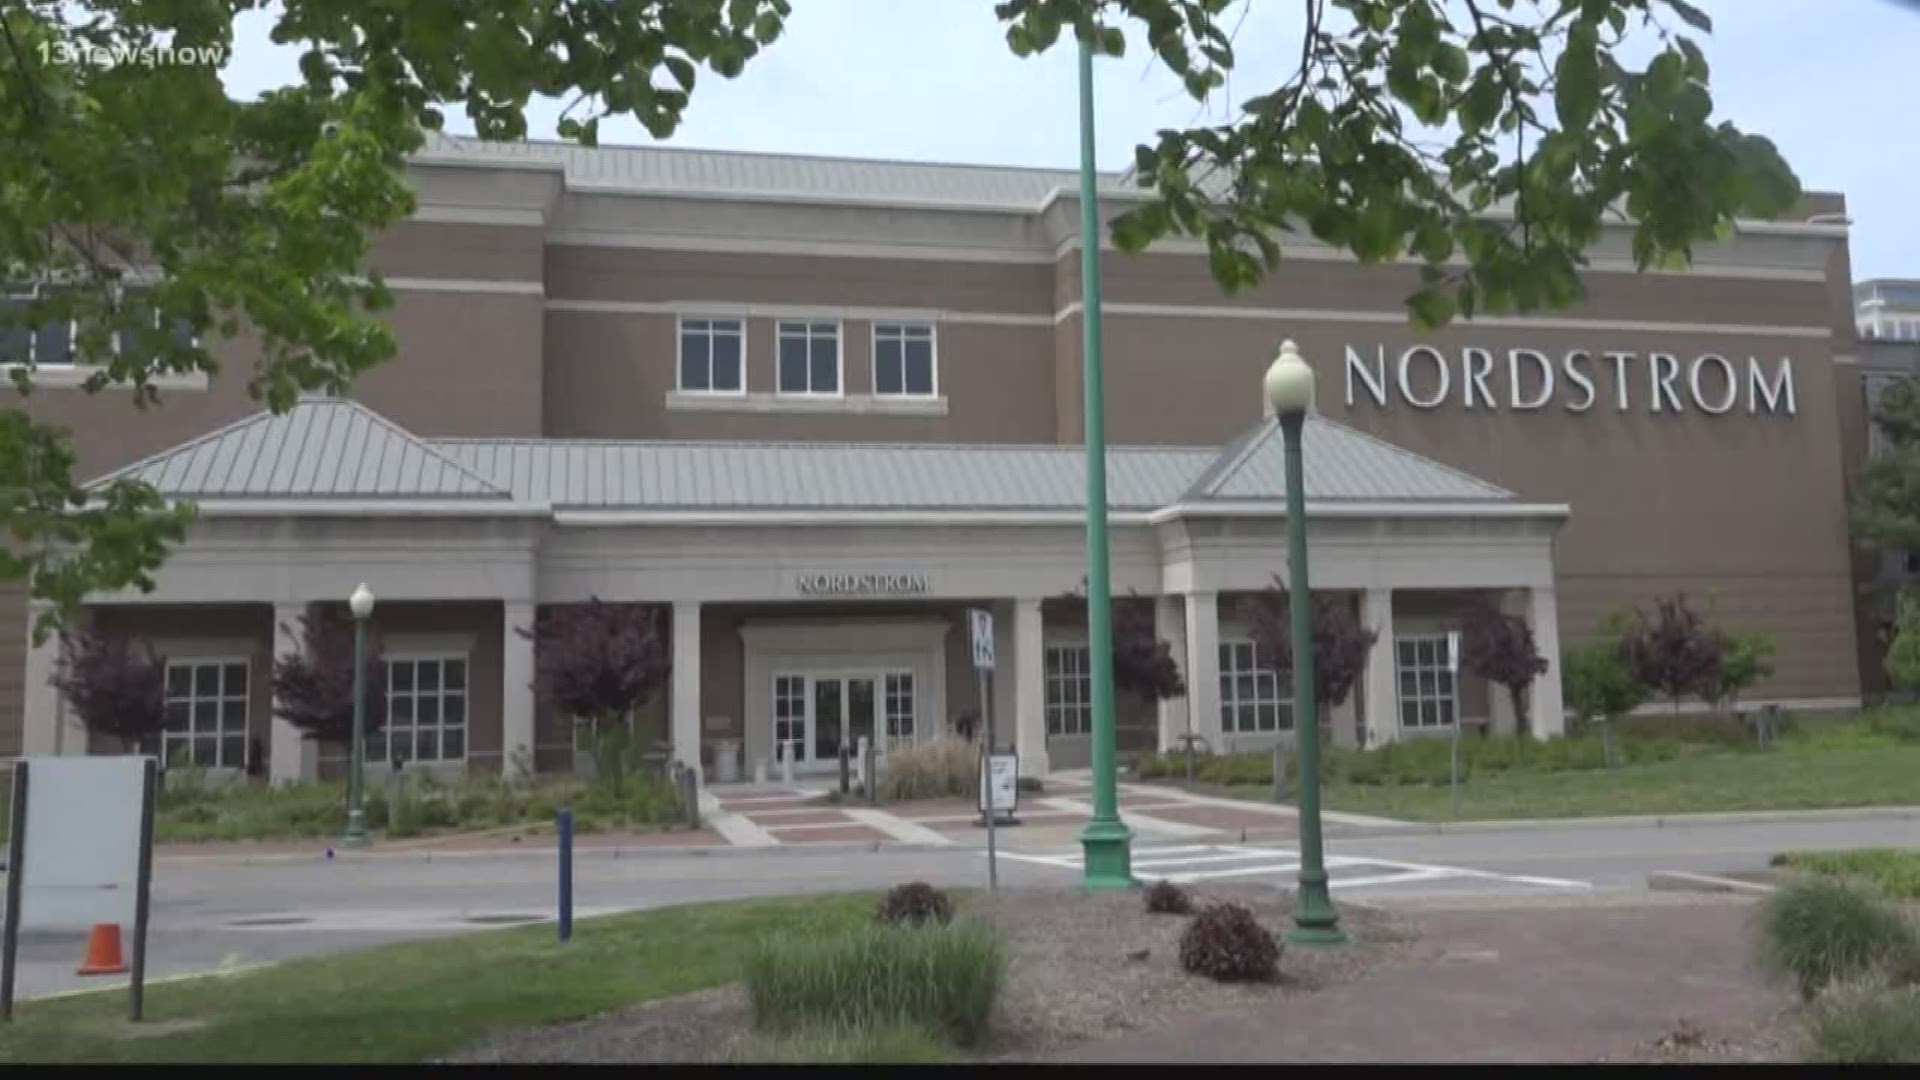 The Nordstrom at MacArthur Center, which is the only one in Hampton Roads, is facing slumping sales after taking a steep hit last year.